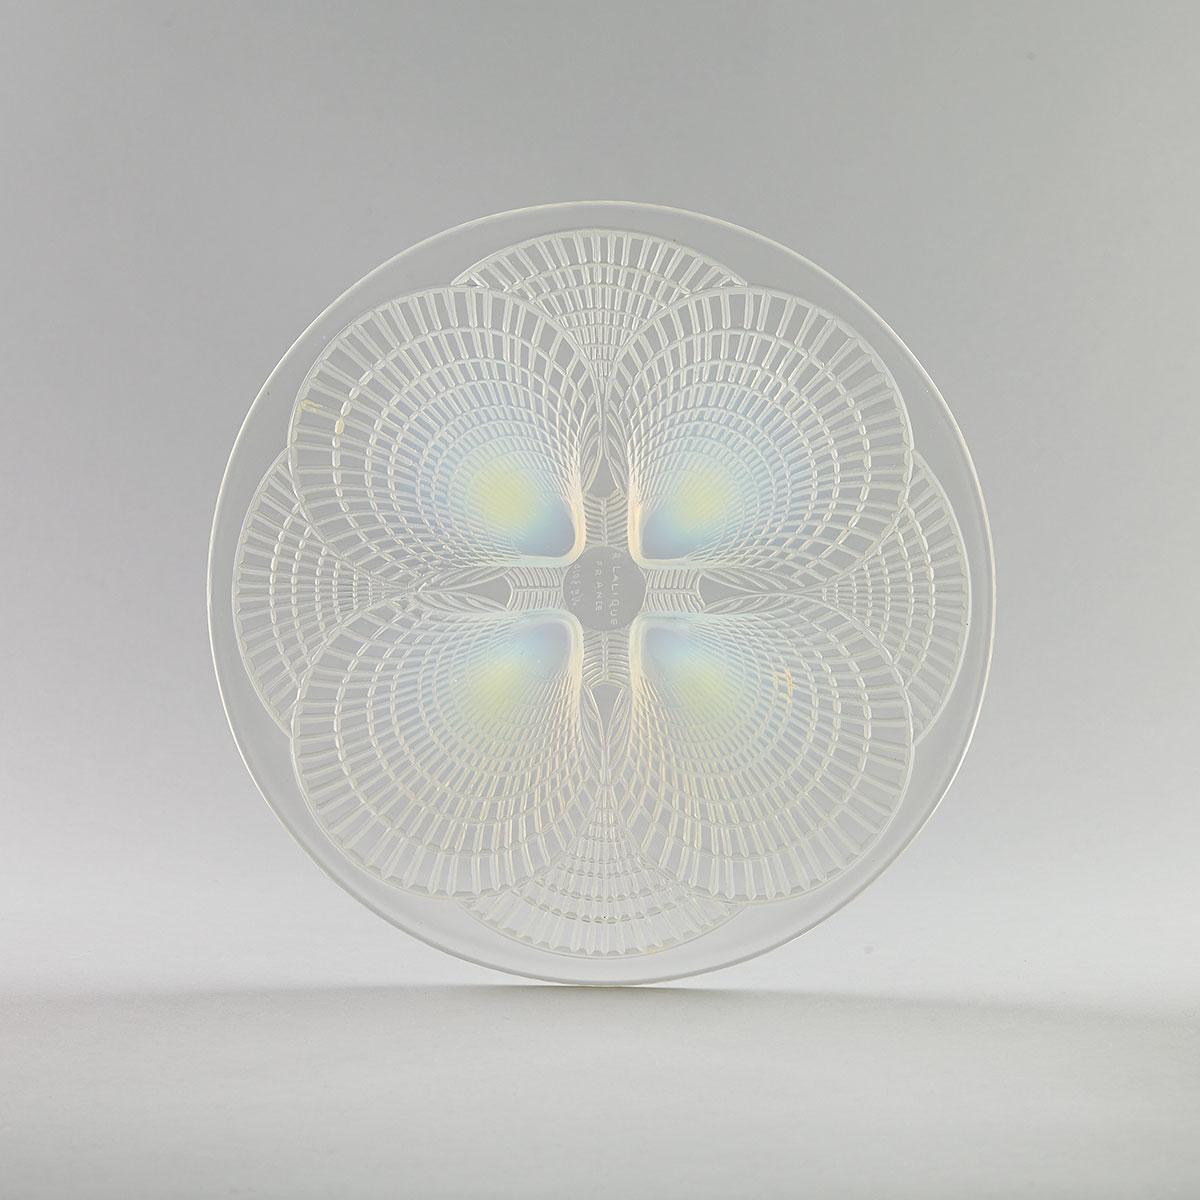 ‘Coquilles’, Lalique Moulded Opalescent Glass Plate, 1930s